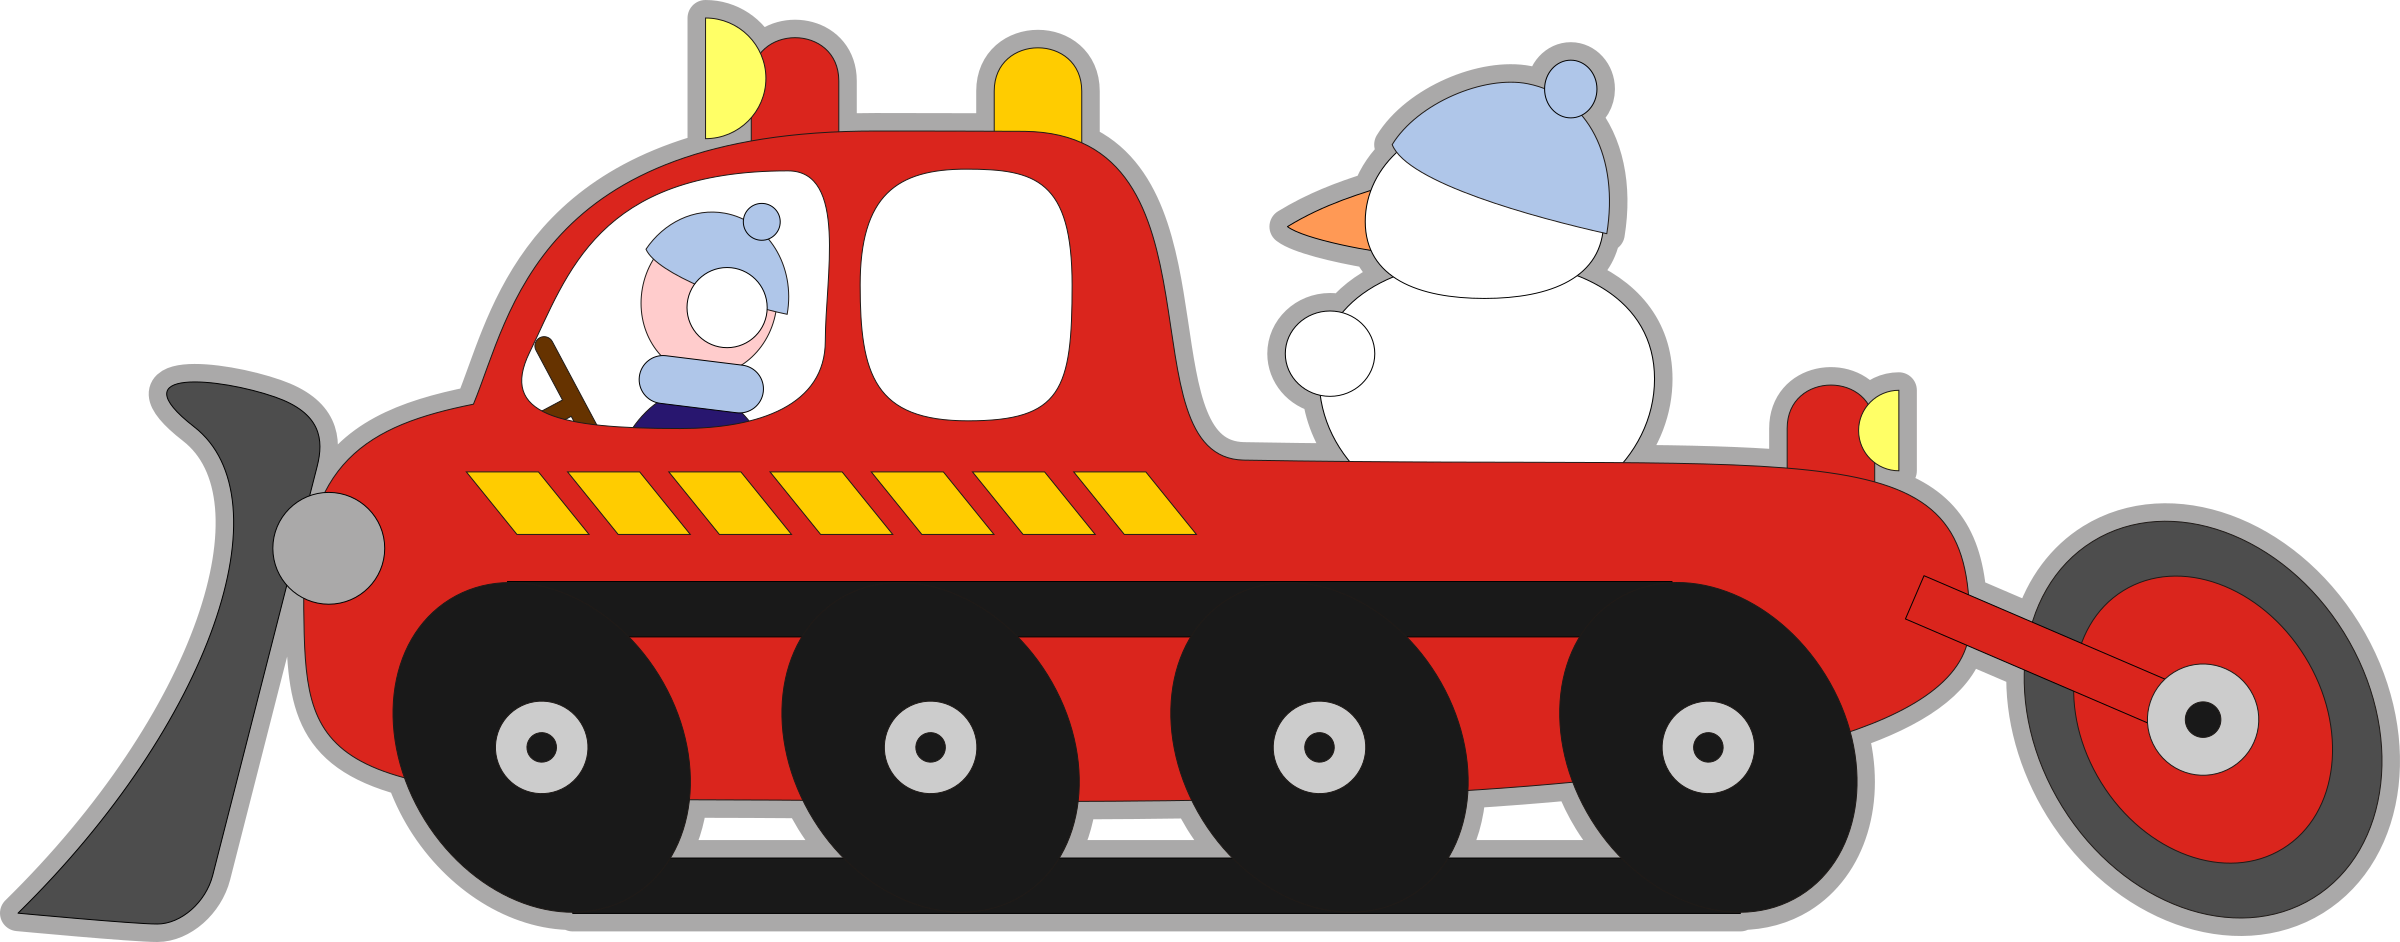 Plow big image png. Clipart snow snow plowing